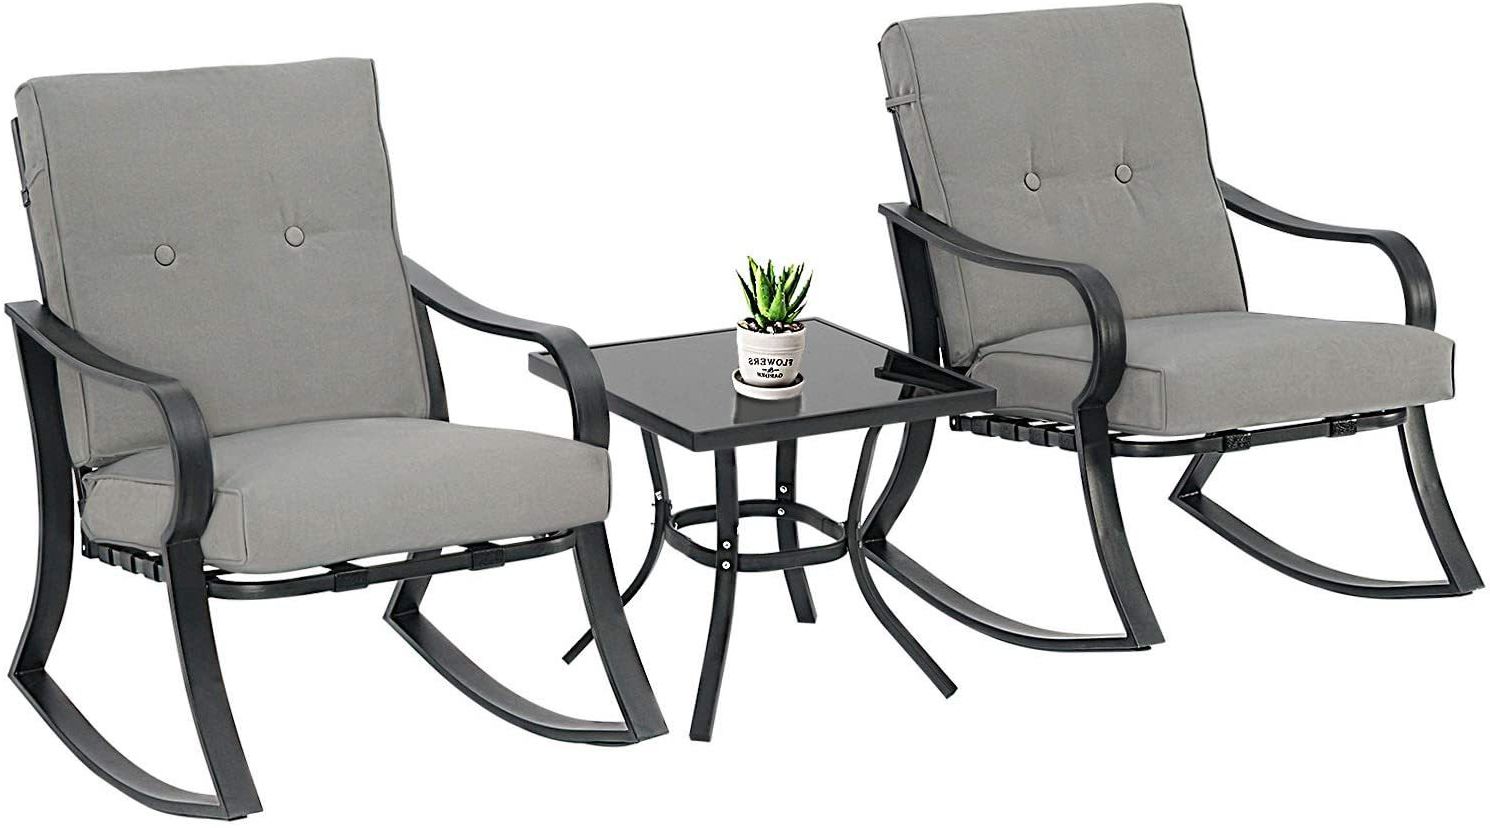 Gray Wash Wood Porch Patio Chairs Sets Inside Well Known Classic Brands 3 Piece Outdoor Rocking Chairs Bistro Set Black Steel (View 1 of 15)